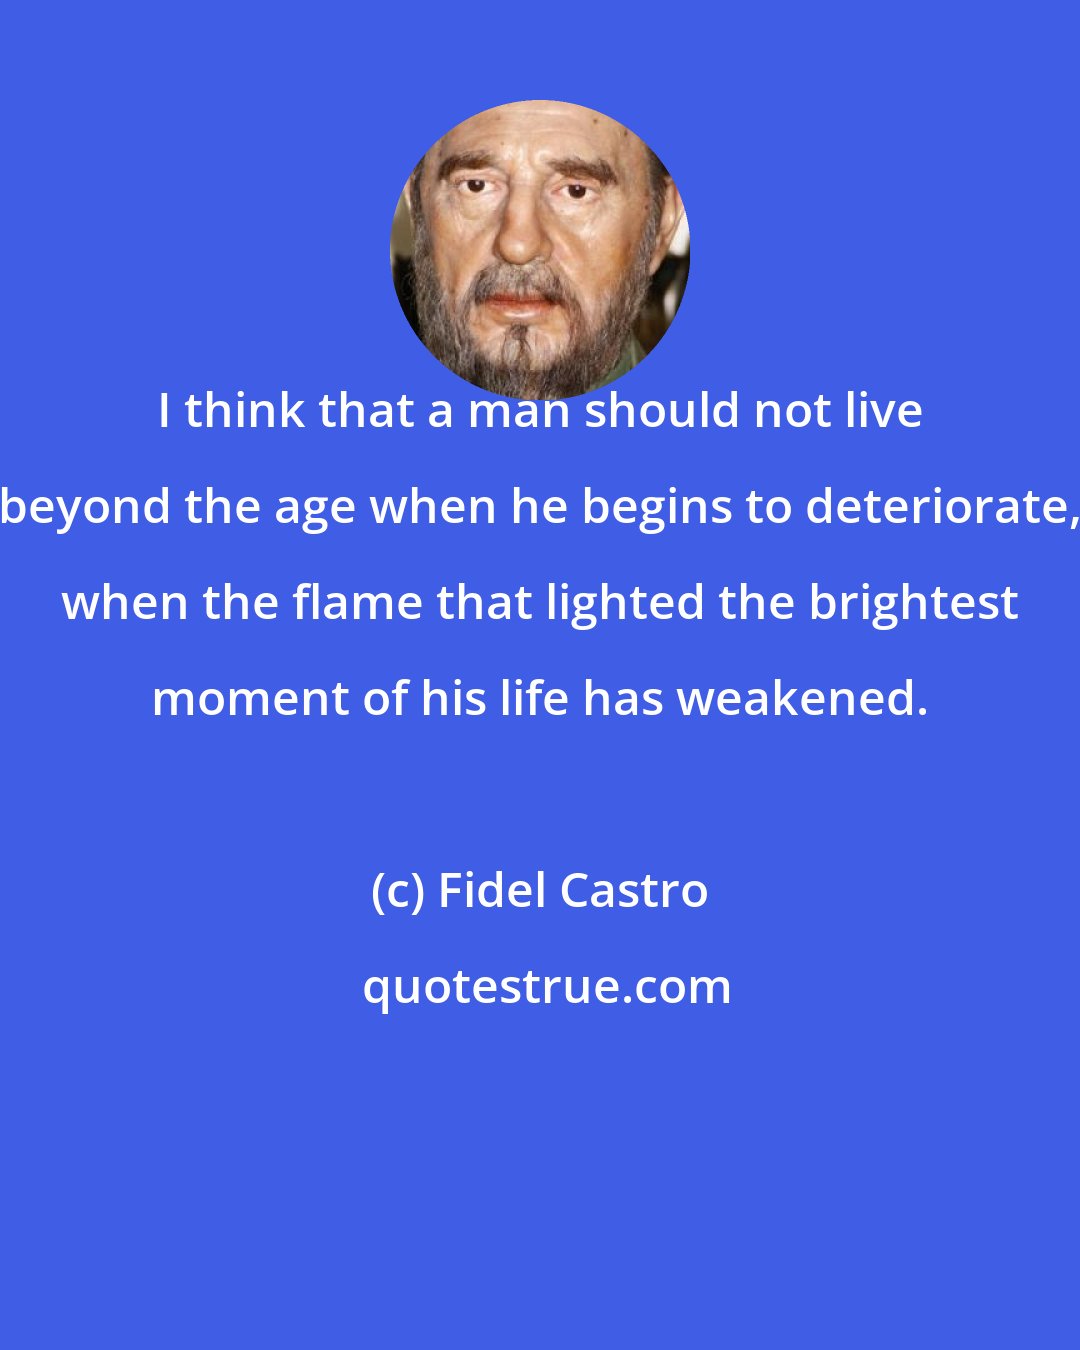 Fidel Castro: I think that a man should not live beyond the age when he begins to deteriorate, when the flame that lighted the brightest moment of his life has weakened.